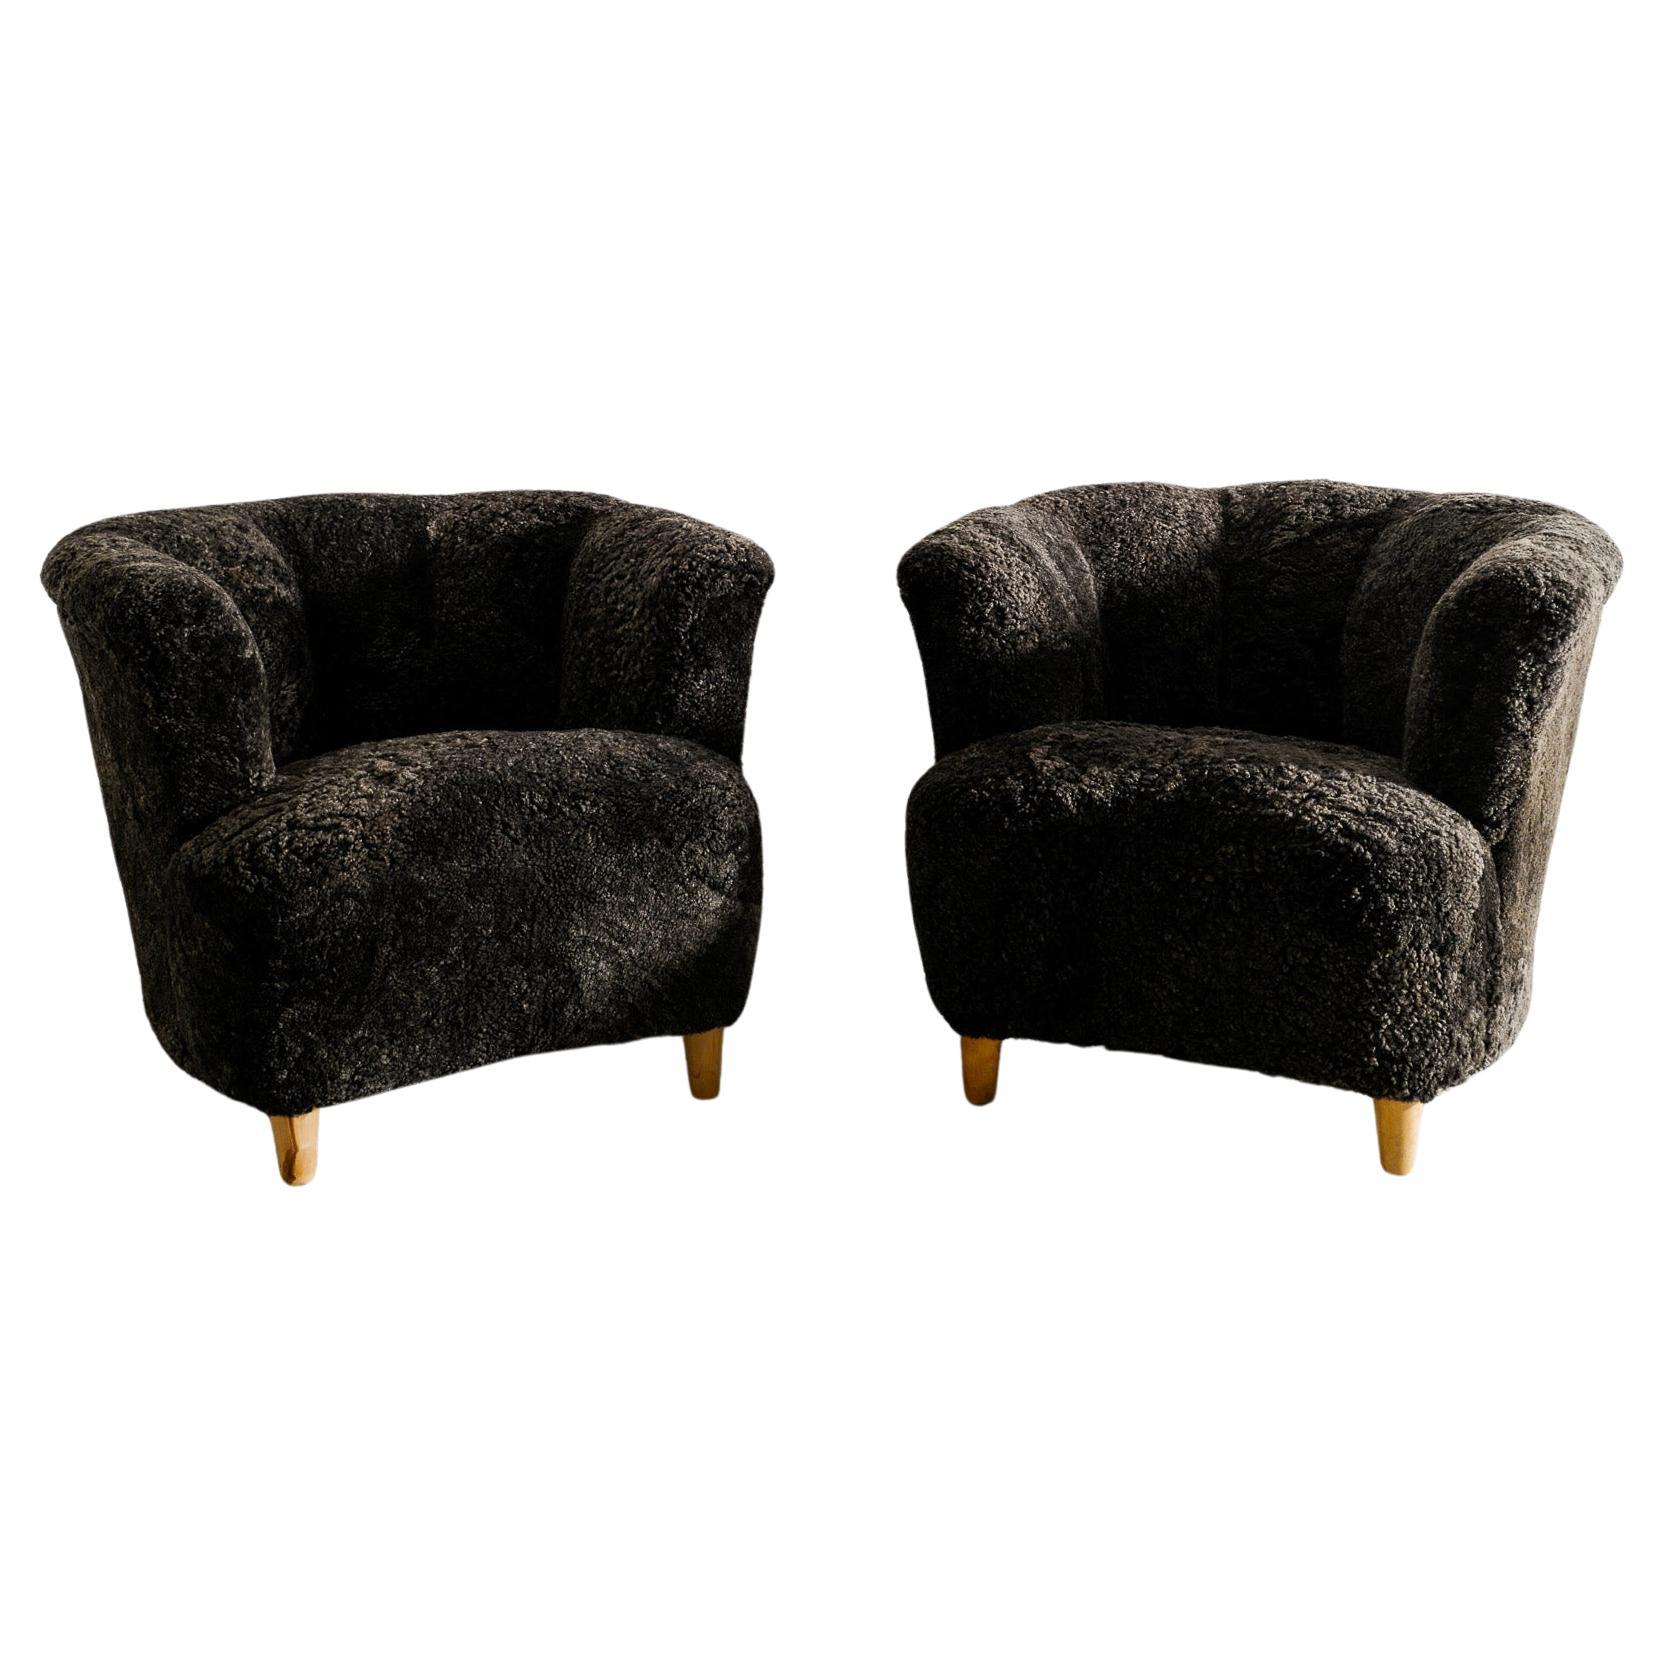 Pair of Curved Swedish Modern Arm Lounge Chairs in Grey Sheepskin Produced 1940s